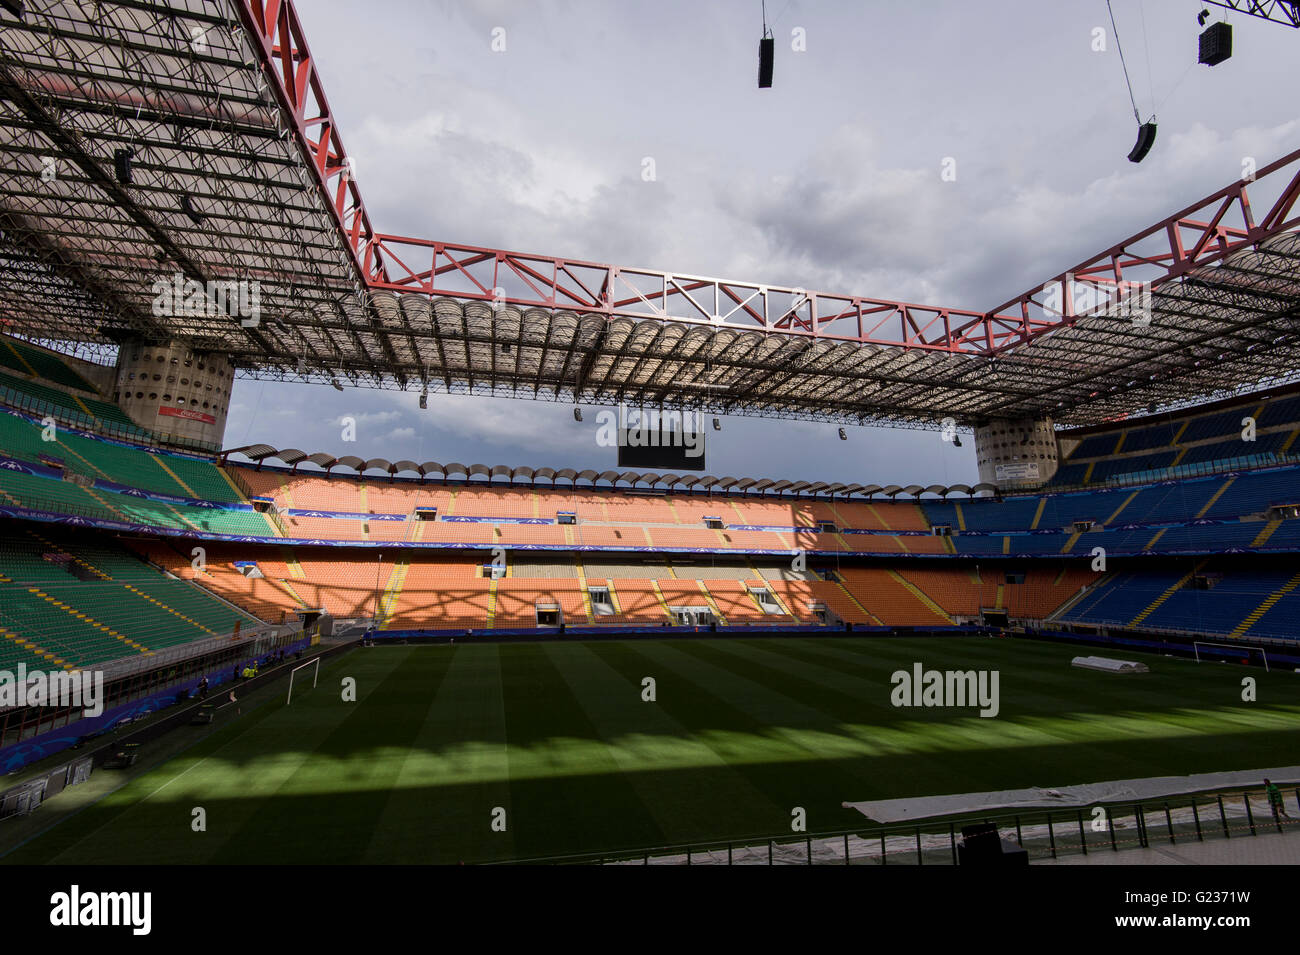 Milan, Italy. 23 may, 2016: Giuseppe Meazza stadium (also known as San Siro) will host the Champions League final between Real Madrid Cub de Futbol and Club Atletico De Madrid Stock Photo